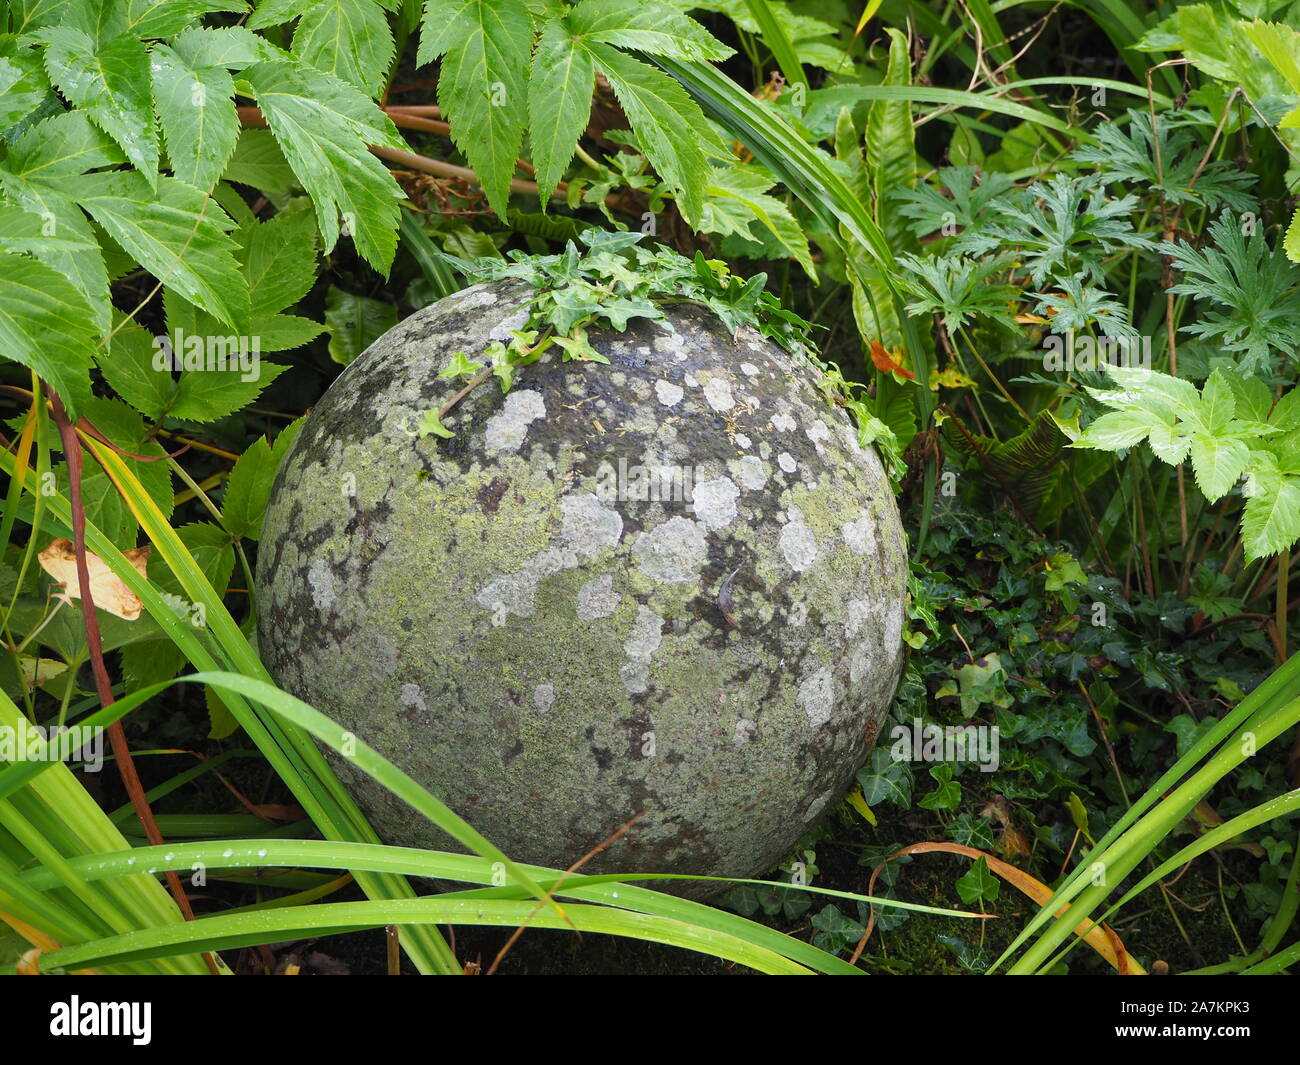 Corner feature of the Sunken garden at Chenies Manor. An old concrete ball surrounded by ivy, foliage and mottled with grey and green lichen. Stock Photo